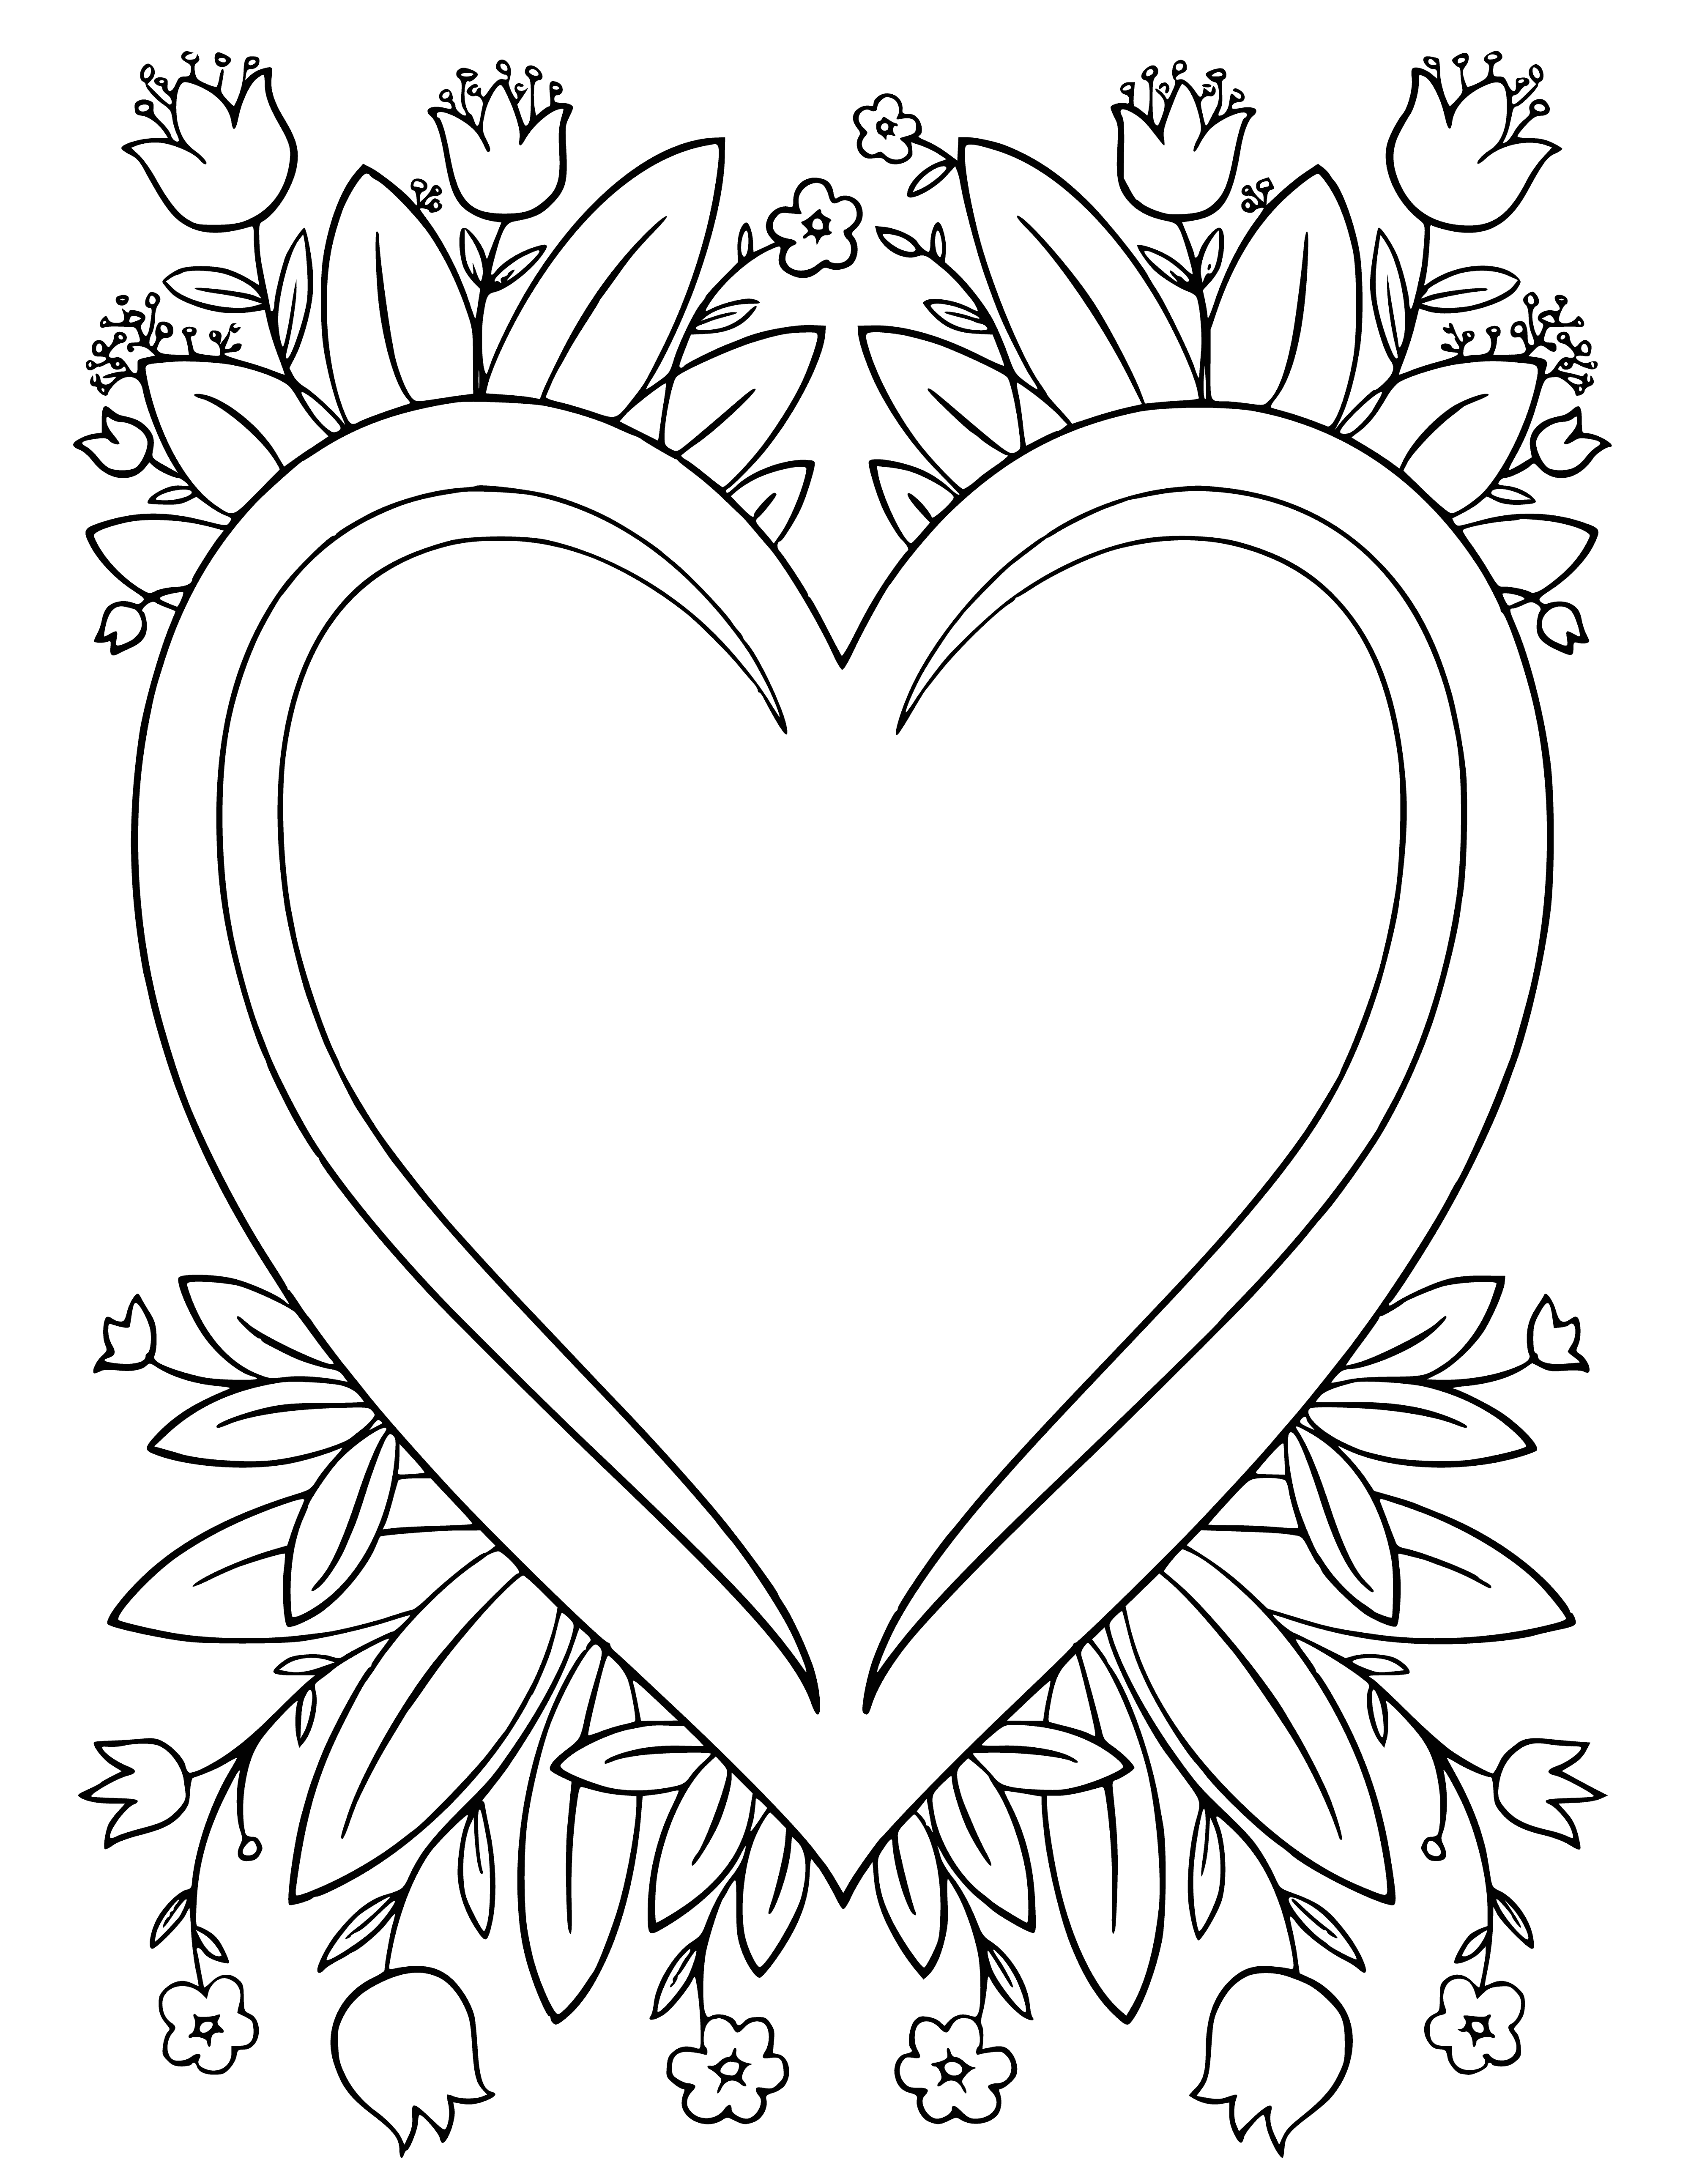 coloring page: 2 hearts & 2 red roses in coloring page, one w/ small hearts, one w/ stripes. #coloringpages #roses #hearts